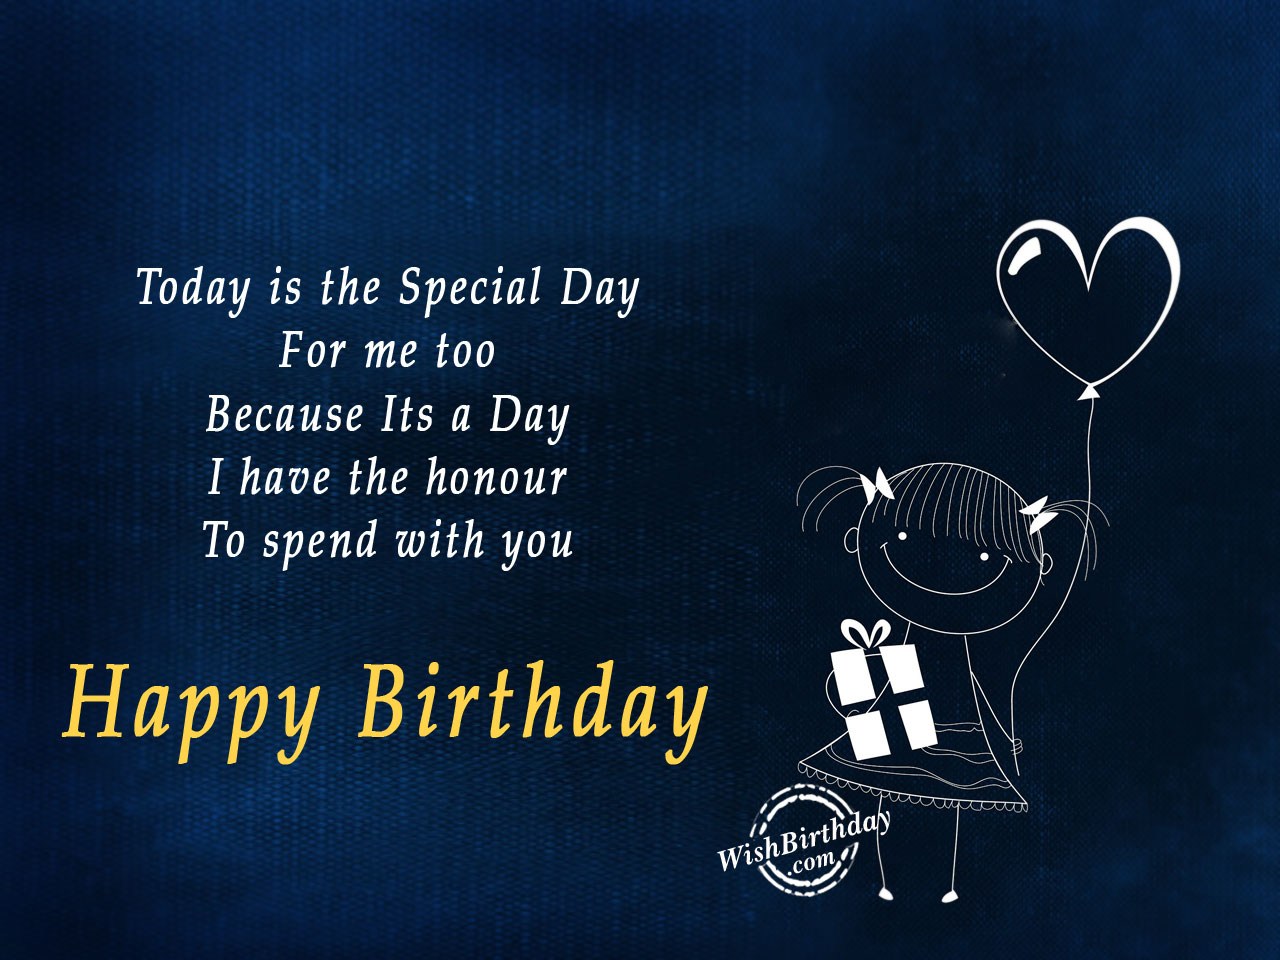 Today is the special day - WishBirthday.com